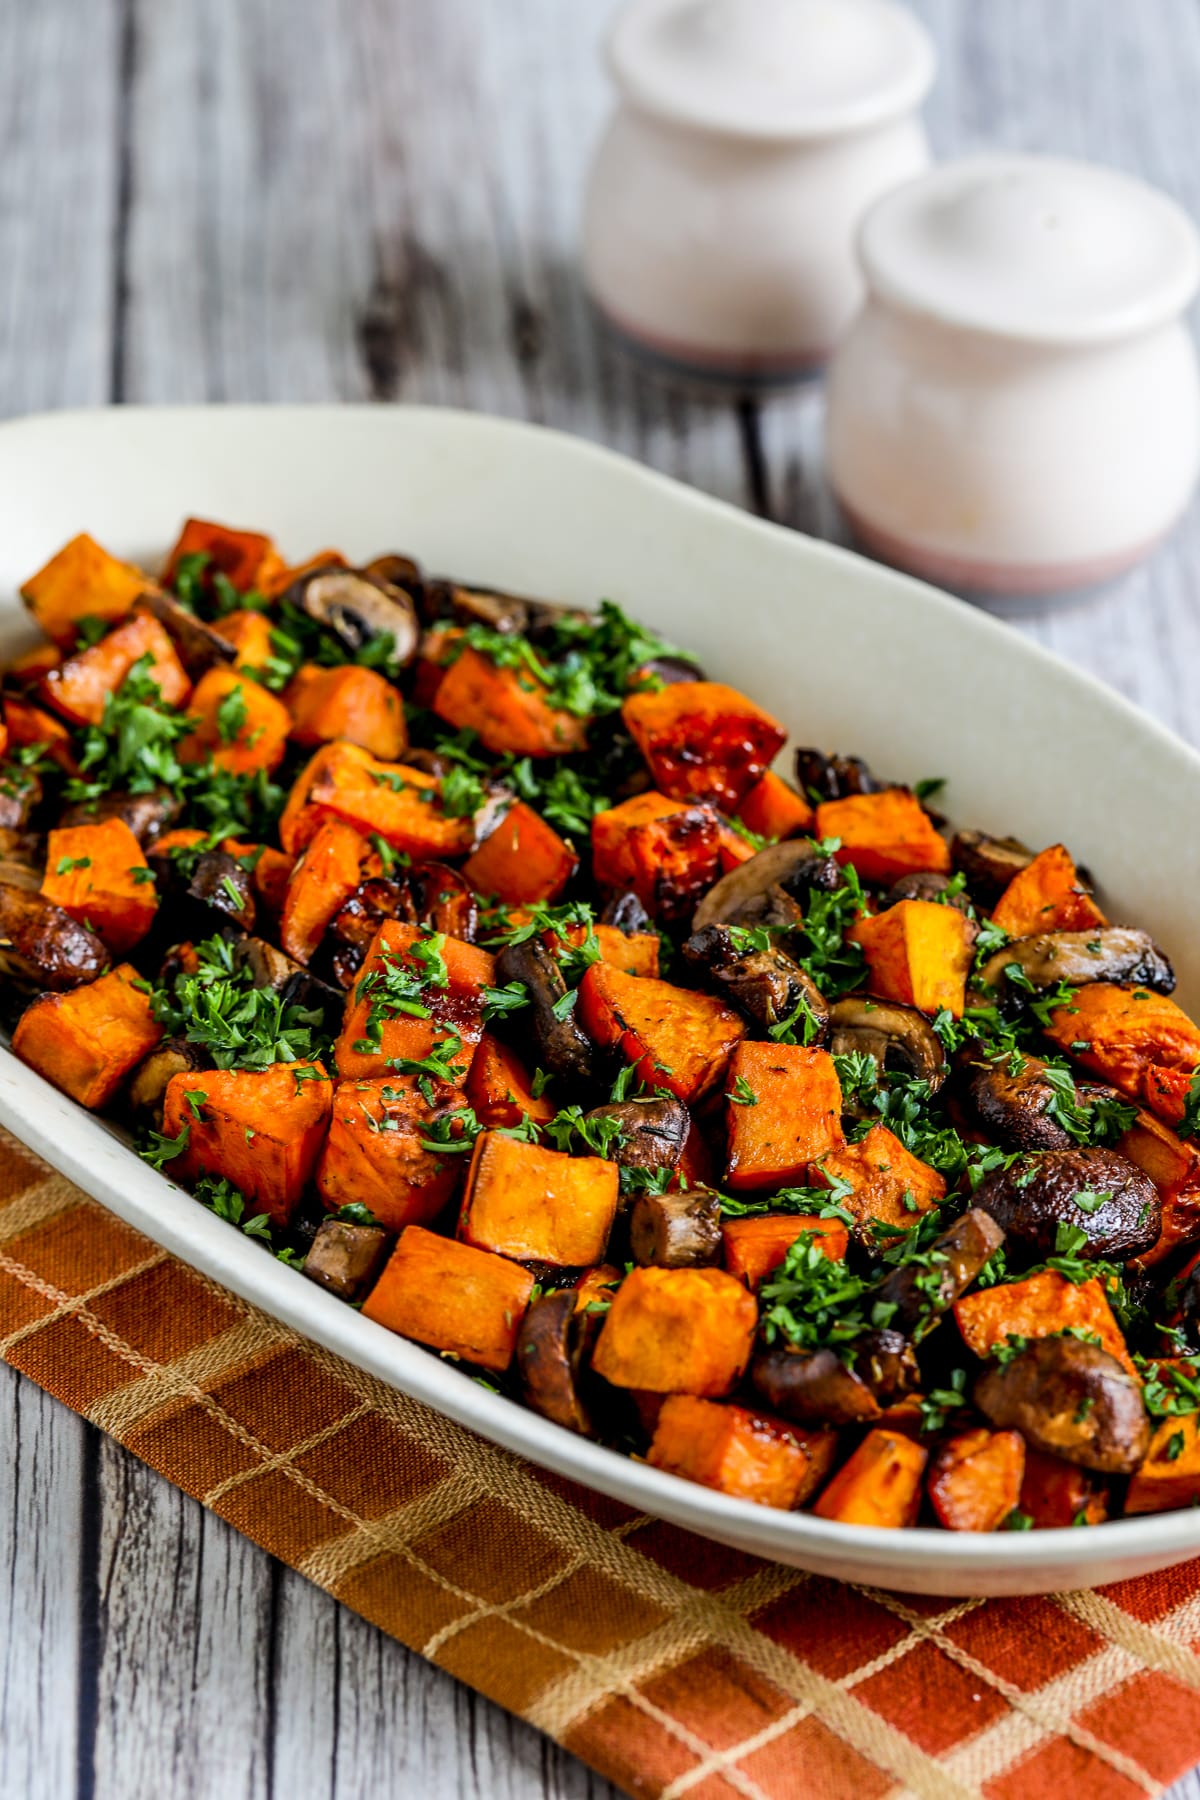 Sweet Potatoes and Mushrooms shown on serving platter with parsley garnish